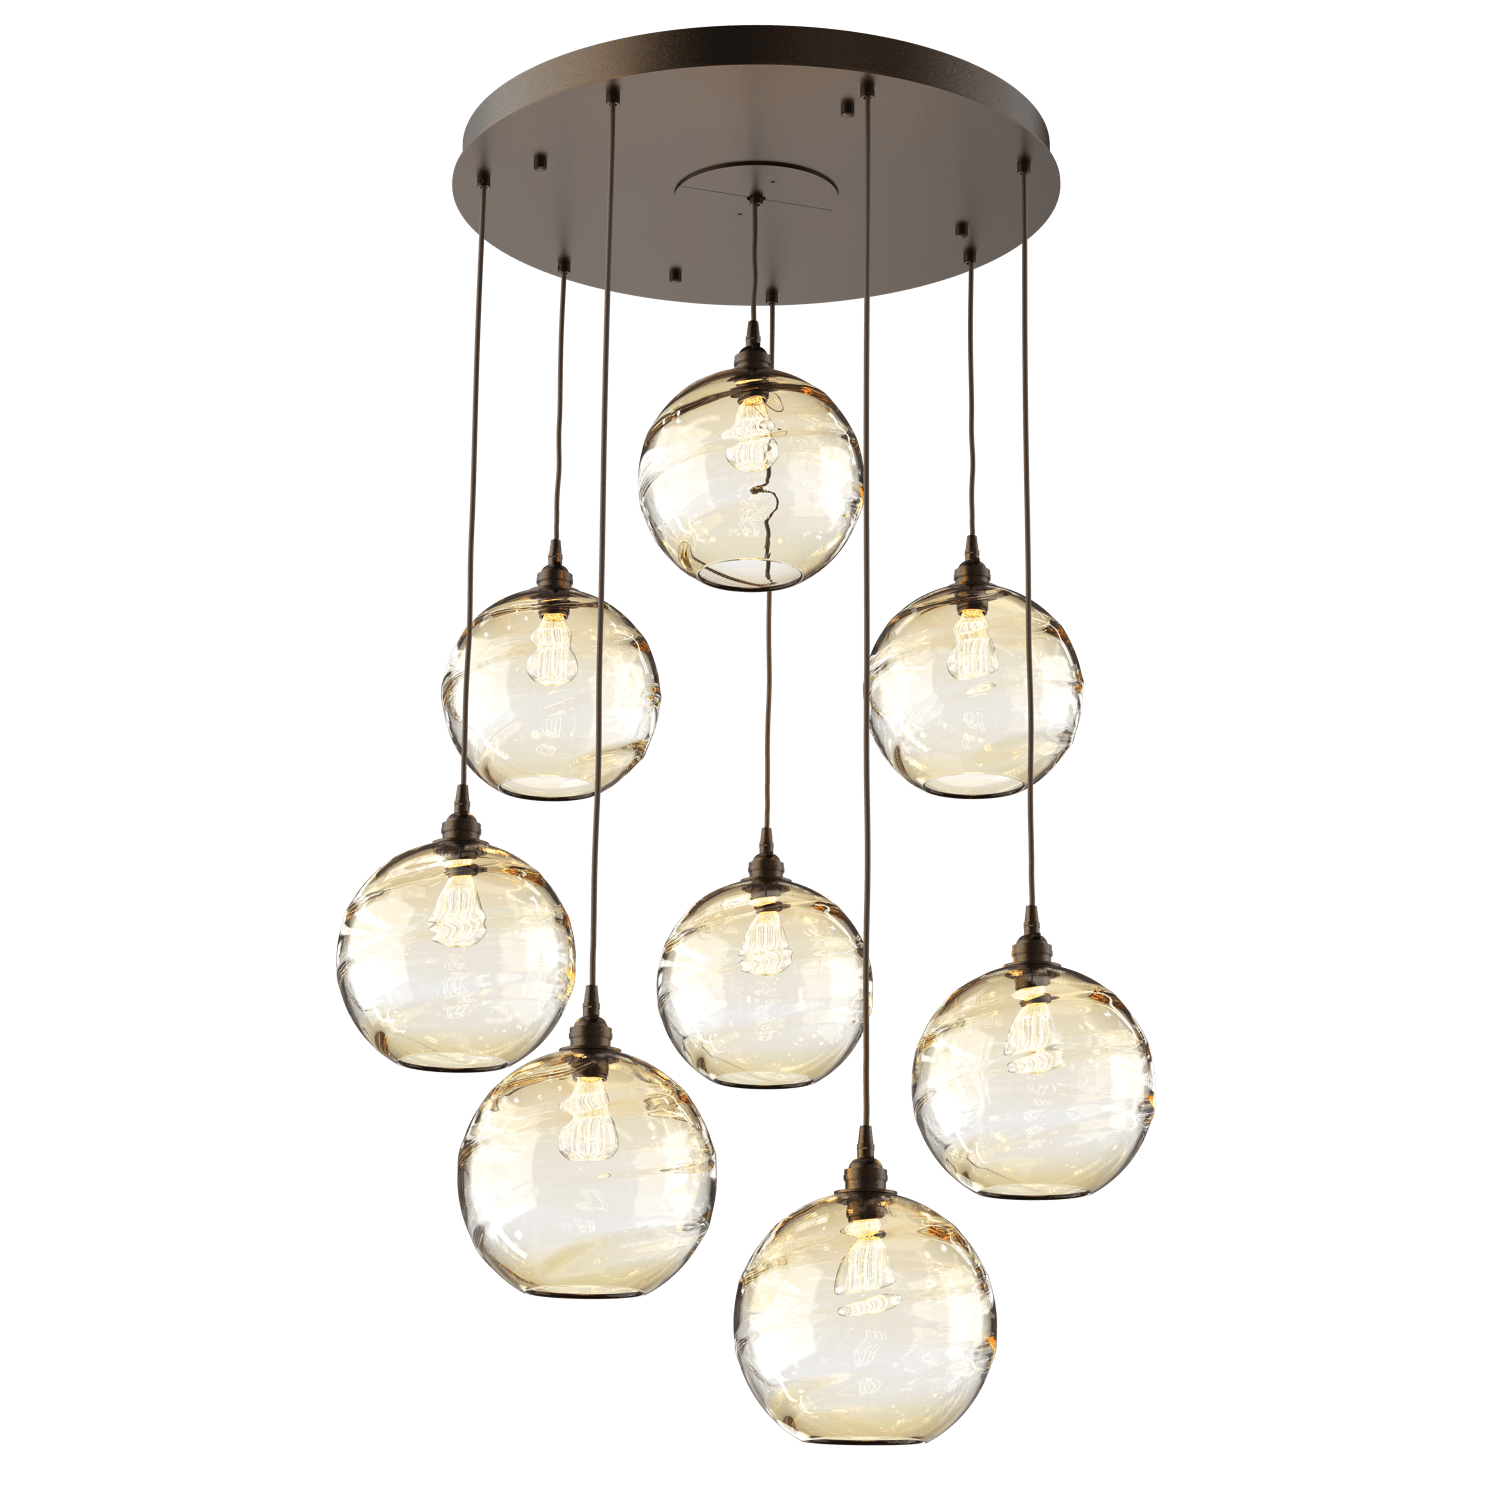 CHB0047-08-FB-OA-Hammerton-Studio-Optic-Blown-Glass-Terra-8-light-round-pendant-chandelier-with-flat-bronze-finish-and-optic-amber-blown-glass-shades-and-incandescent-lamping